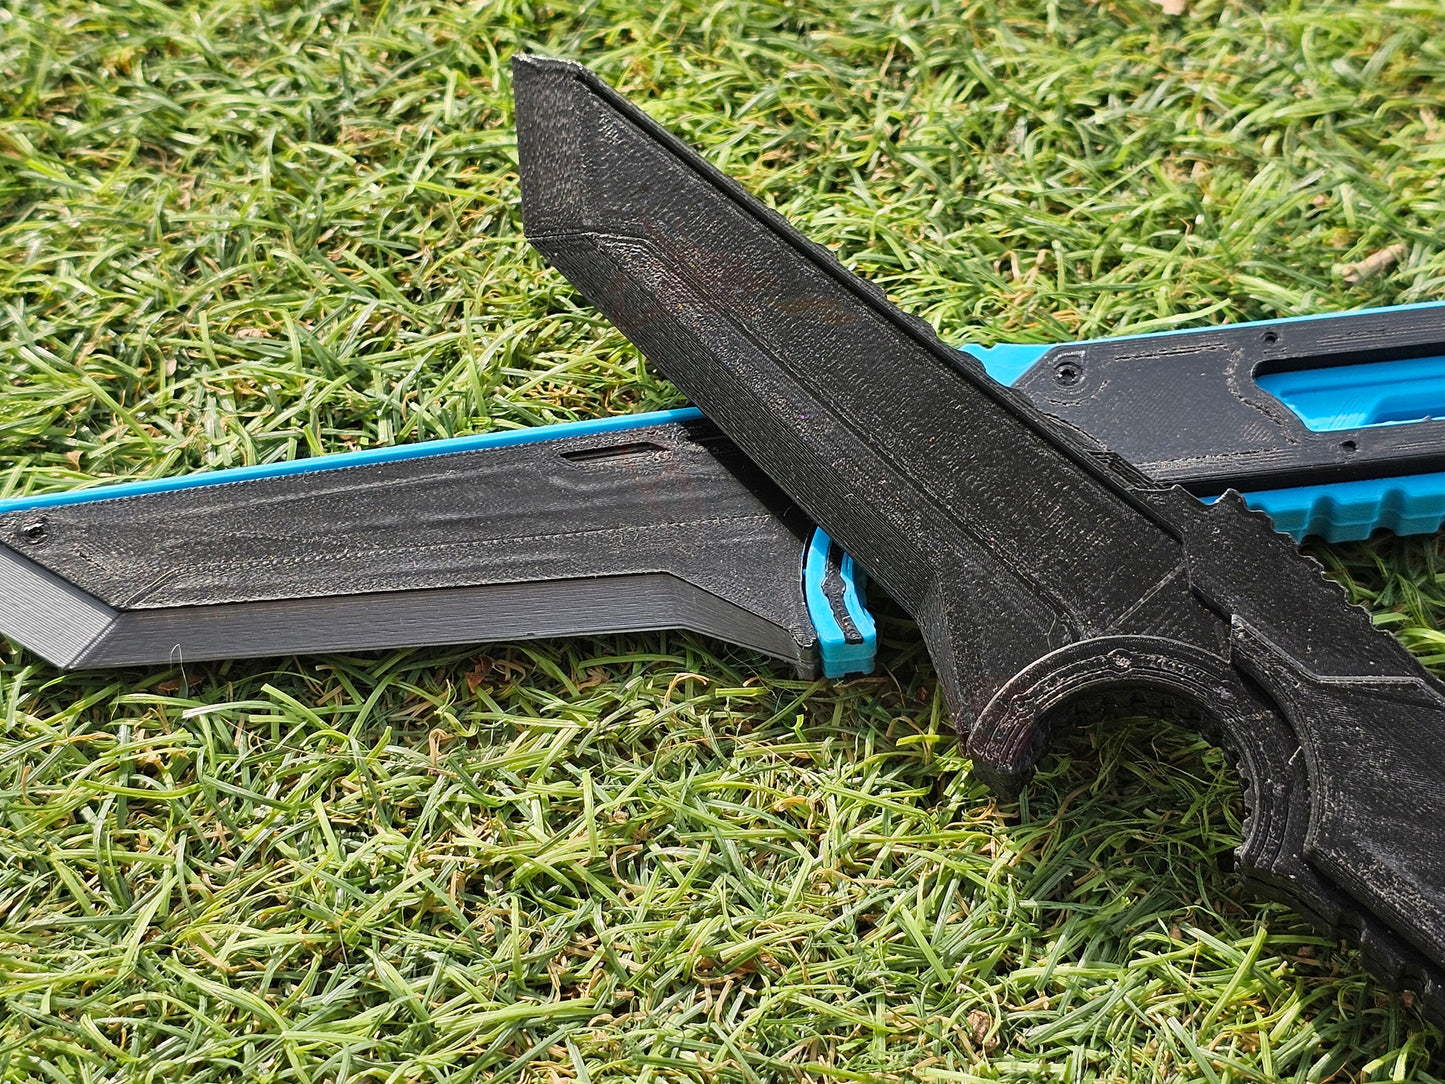 Starfield Combat Knife Prop Replica Stealth Weapon - by DreamOfProps